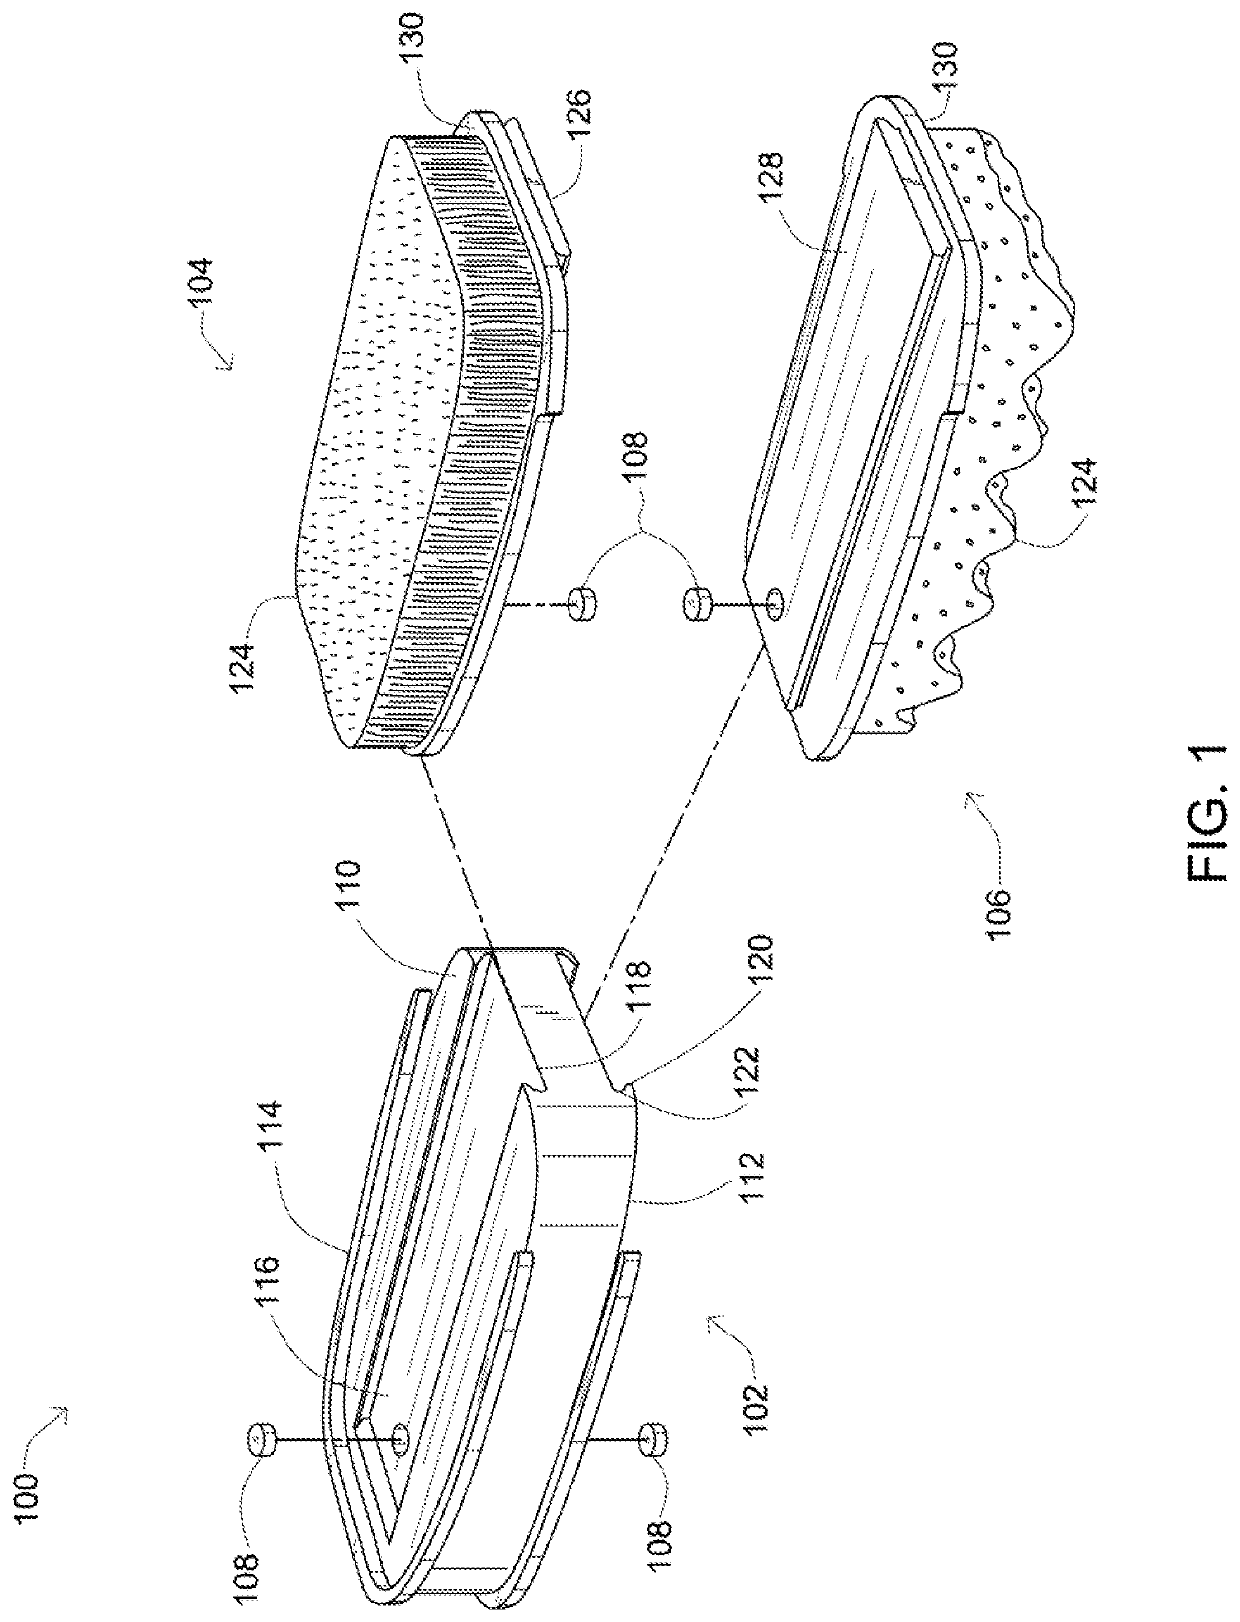 Combination hair styling device